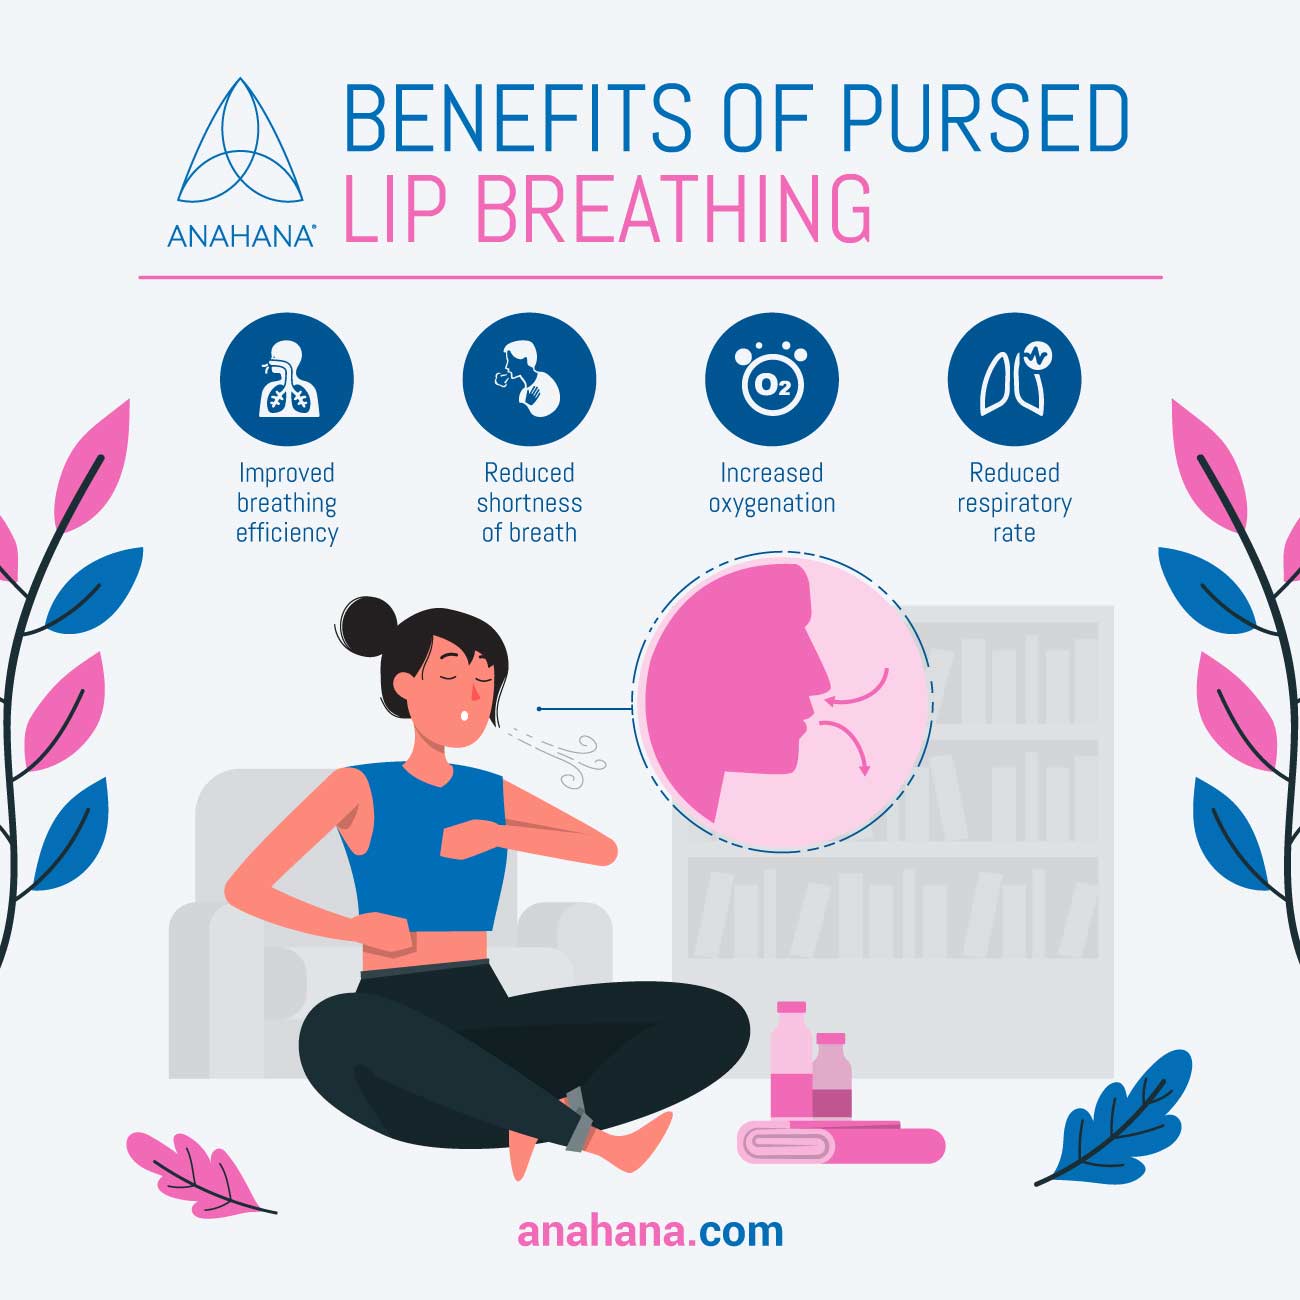 Why Breathing Exercises Help Pursed Lip Breathing Belly Breathing, aka  Diaphragmic Breathing Practice Makes Perfect